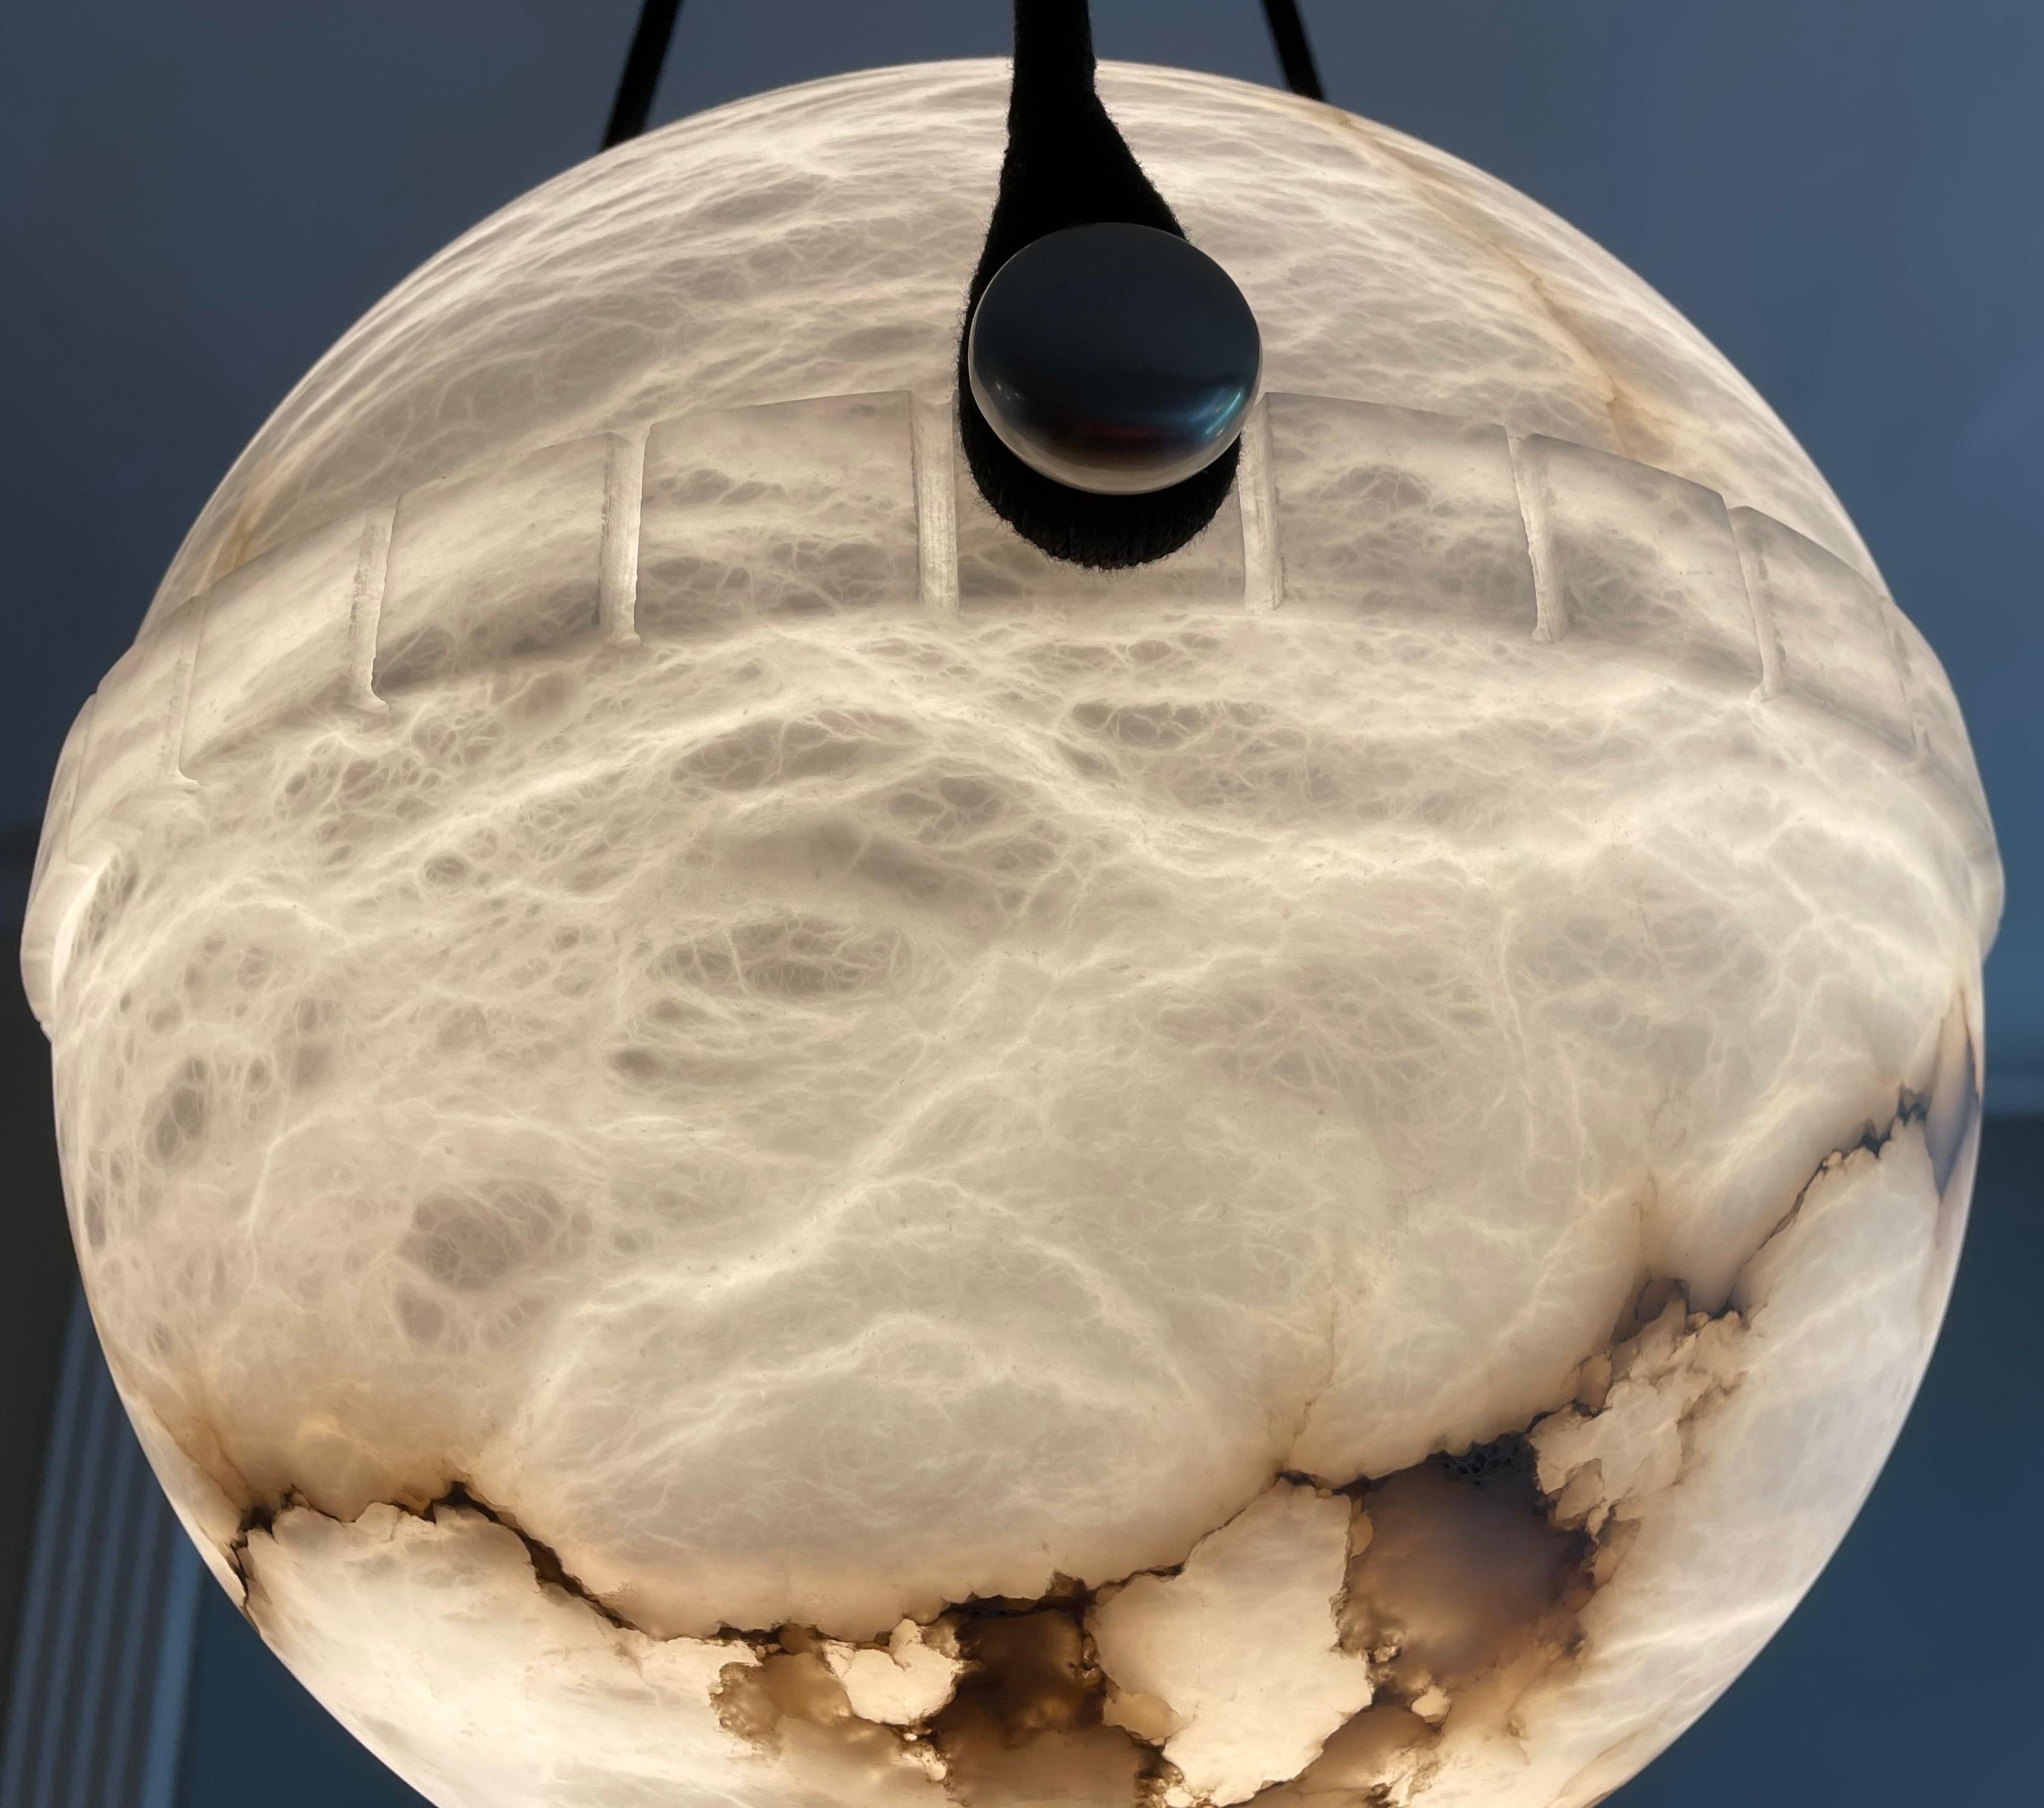 More unusual than the bowl shaped pendants, the globe alabaster features a lower half with a crisp dental motif on the central band and suspends on a set of three brushed nickel flattened balls. The upper half nestles perfectly into the banding and